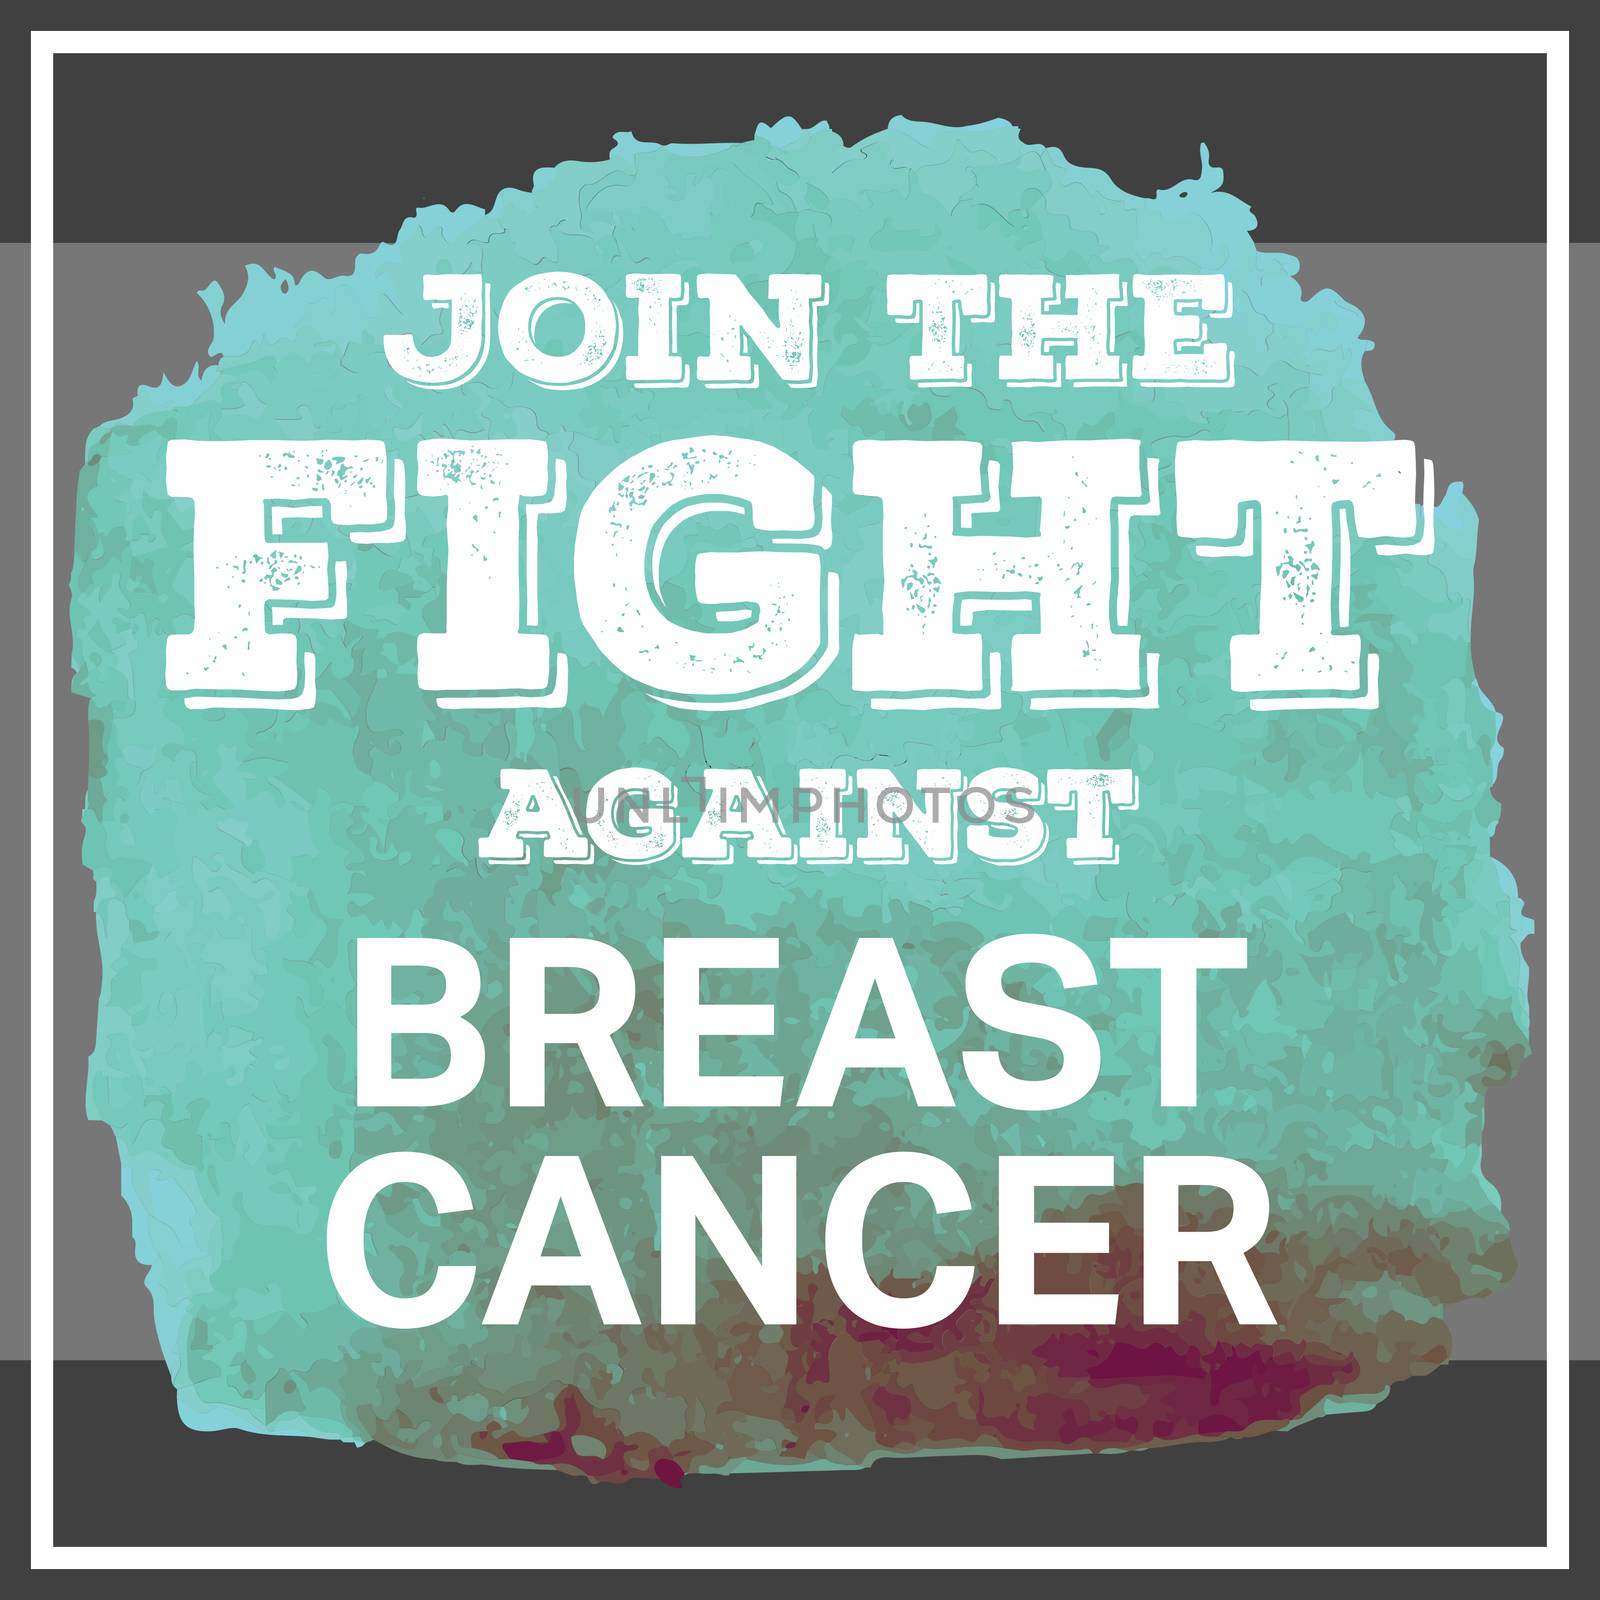 Breast cancer awareness message against digitally generated image of smudged turquoise paint 